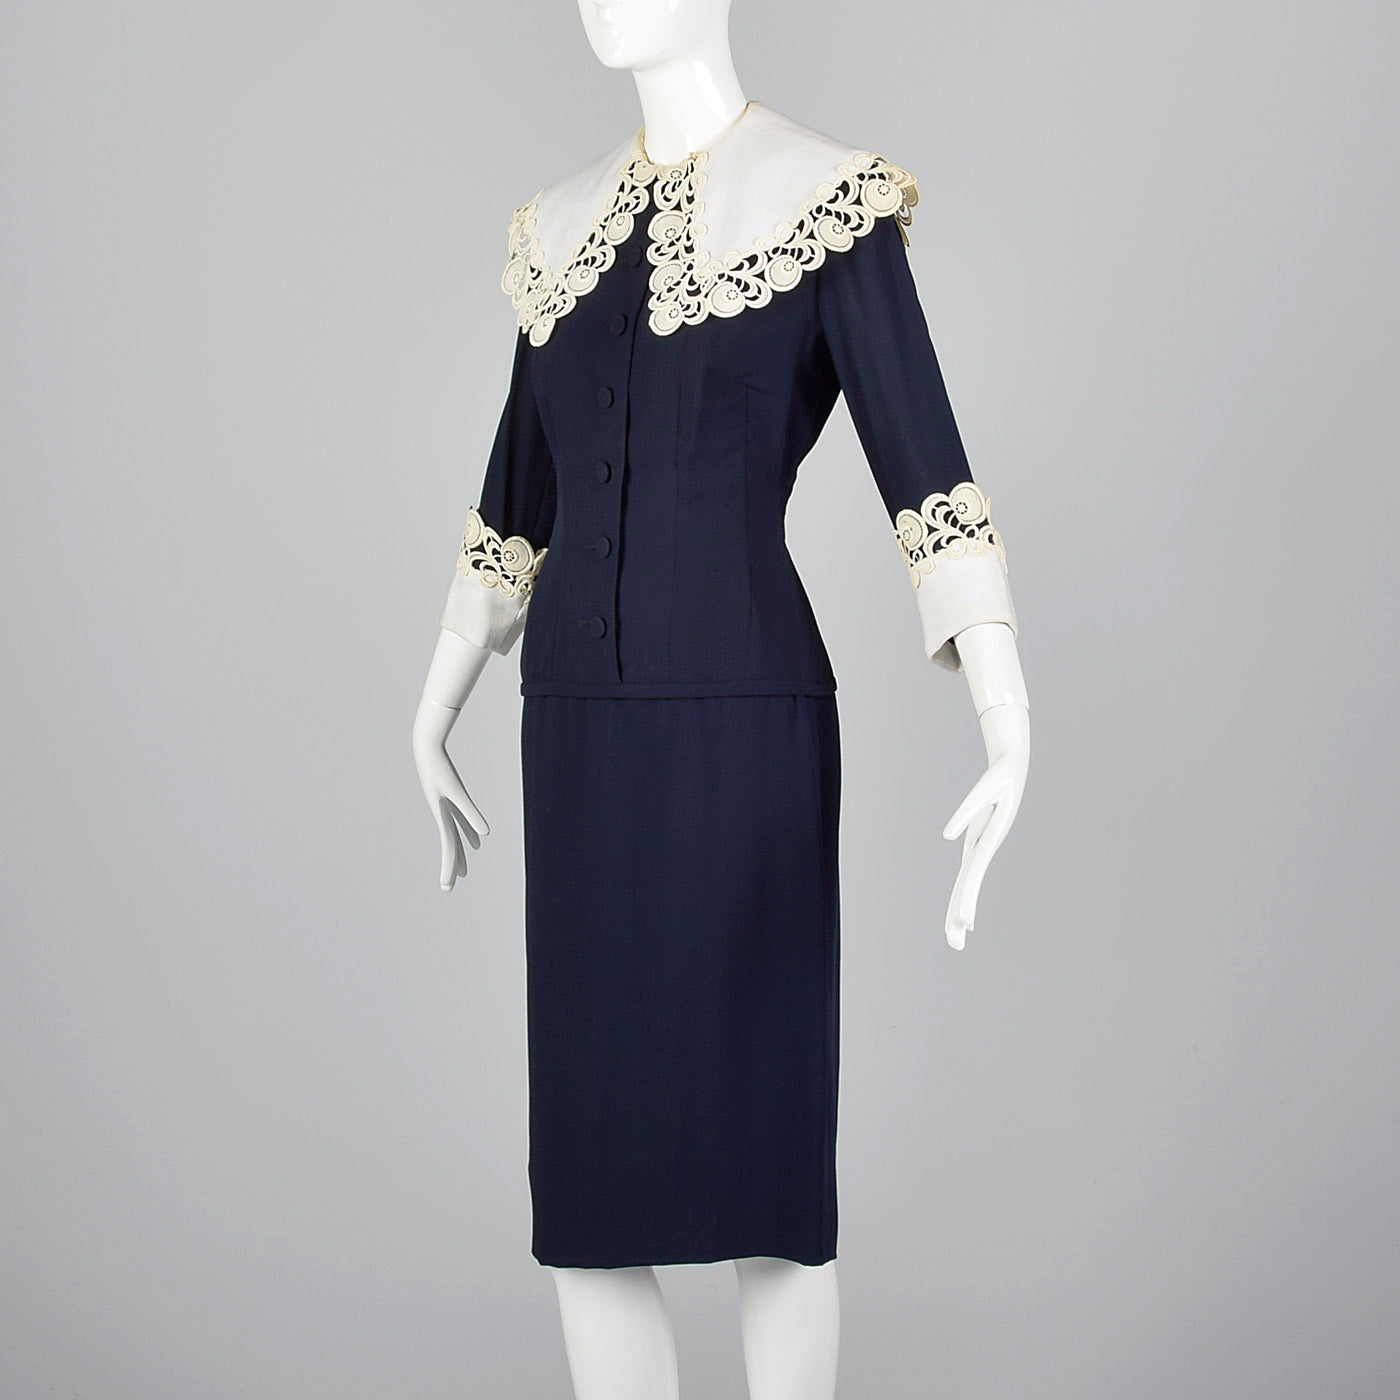 1950s Navy Blue Dress with Large Collar and Cuffs